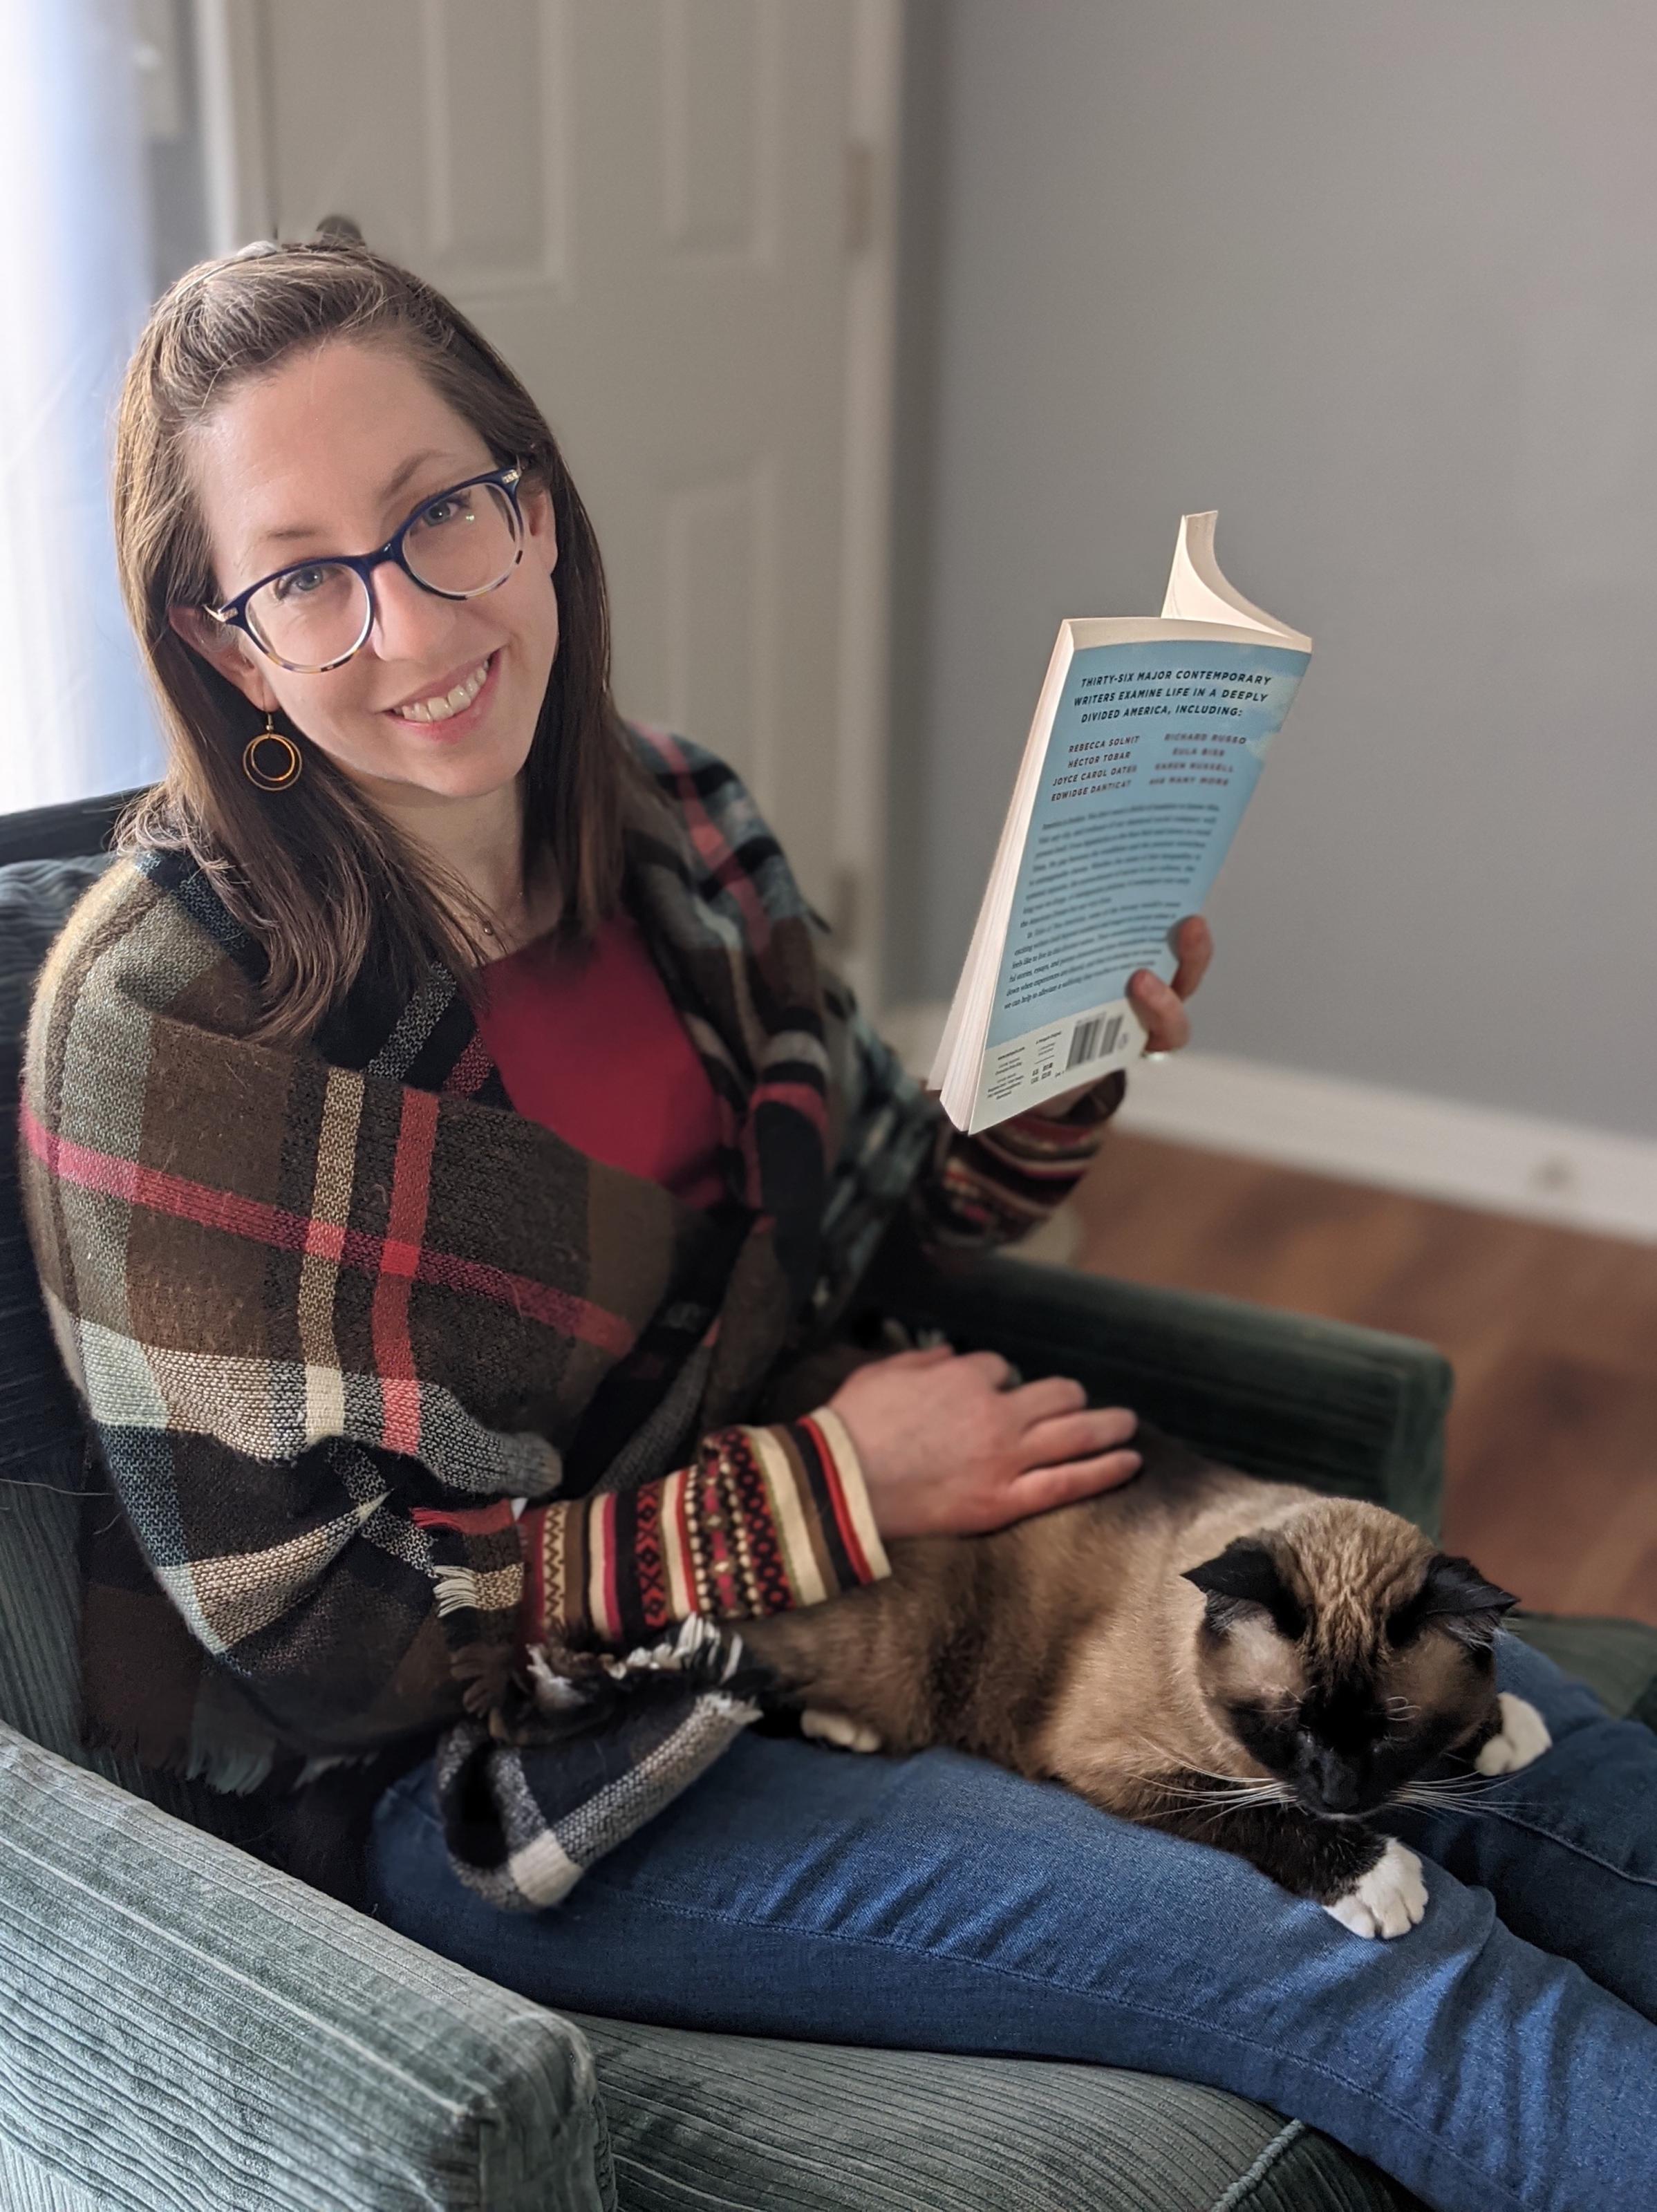 Emily sits in a chair reading a book, with a cat in her lap.